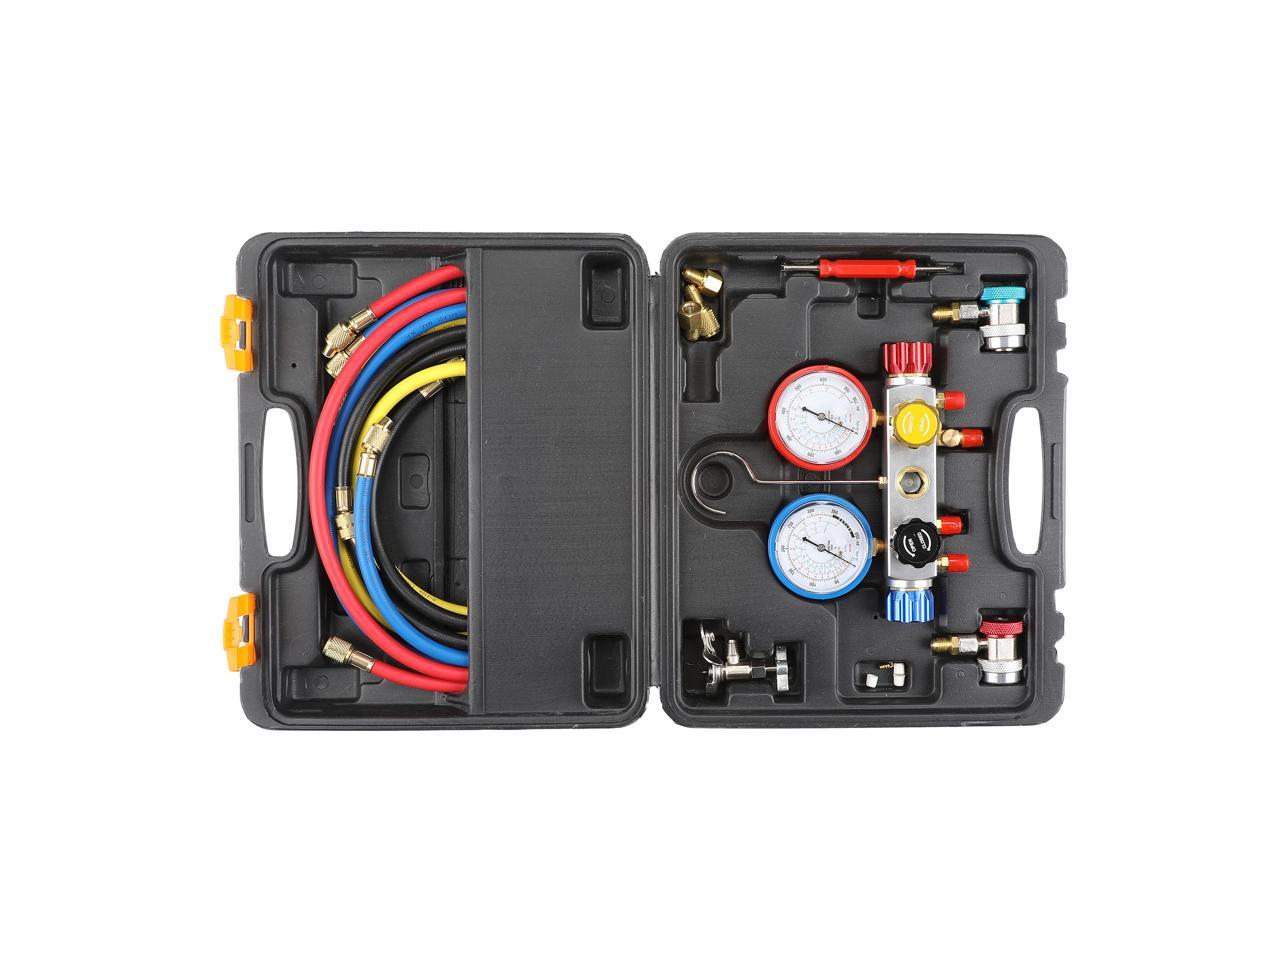 4 Way AC Diagnostic Manifold Gauge Set for Air Conditioner R22 R410A R134A 5FT 